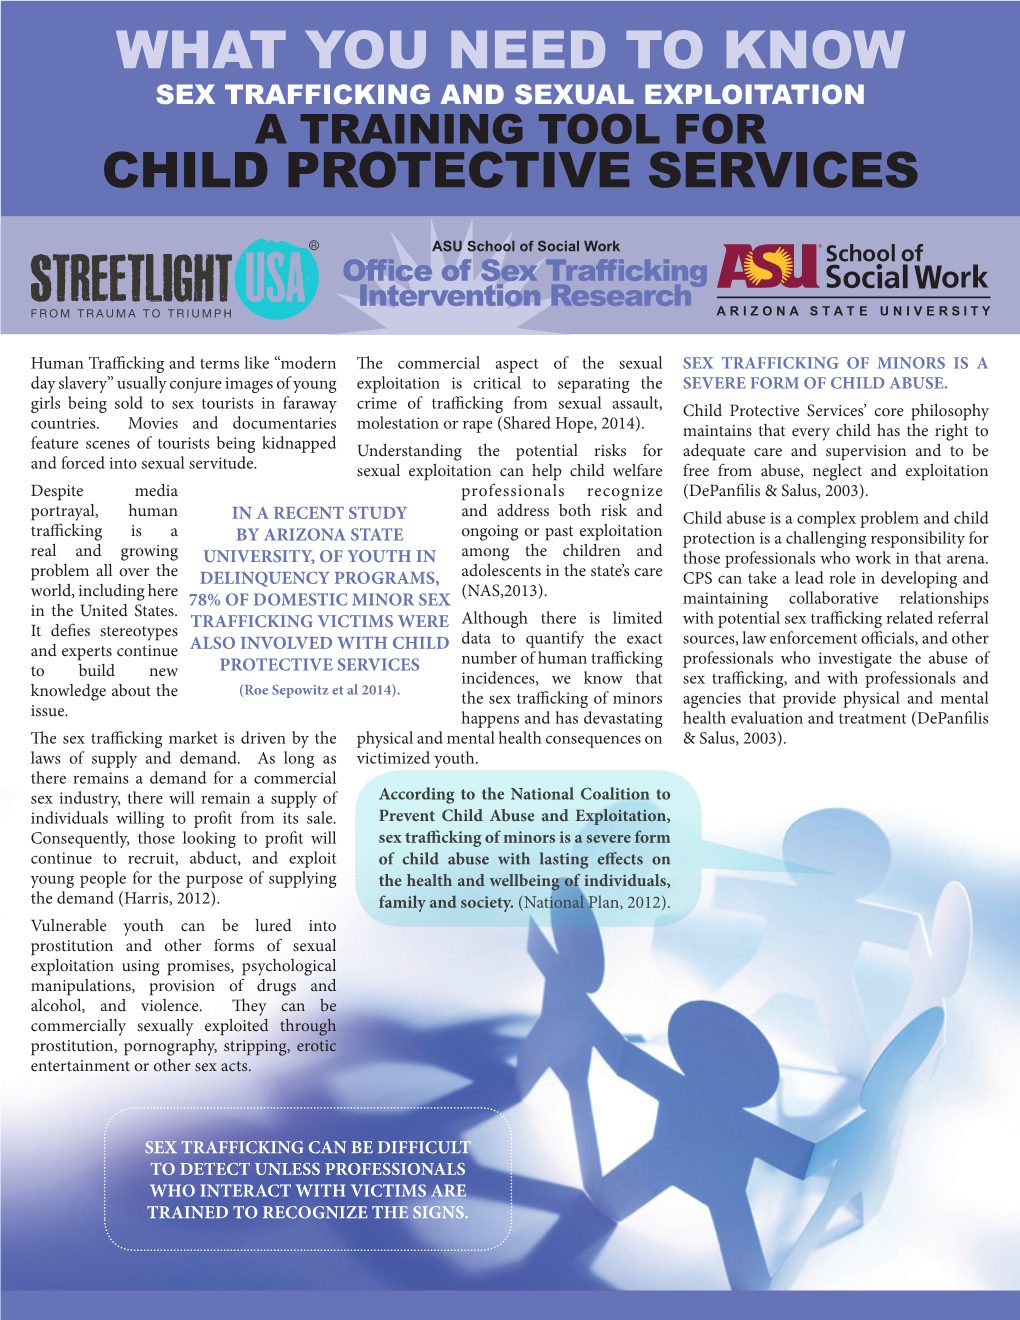 What You Need to Know Sex Trafficking and Sexual Exploitation a Training Tool for Child Protective Services